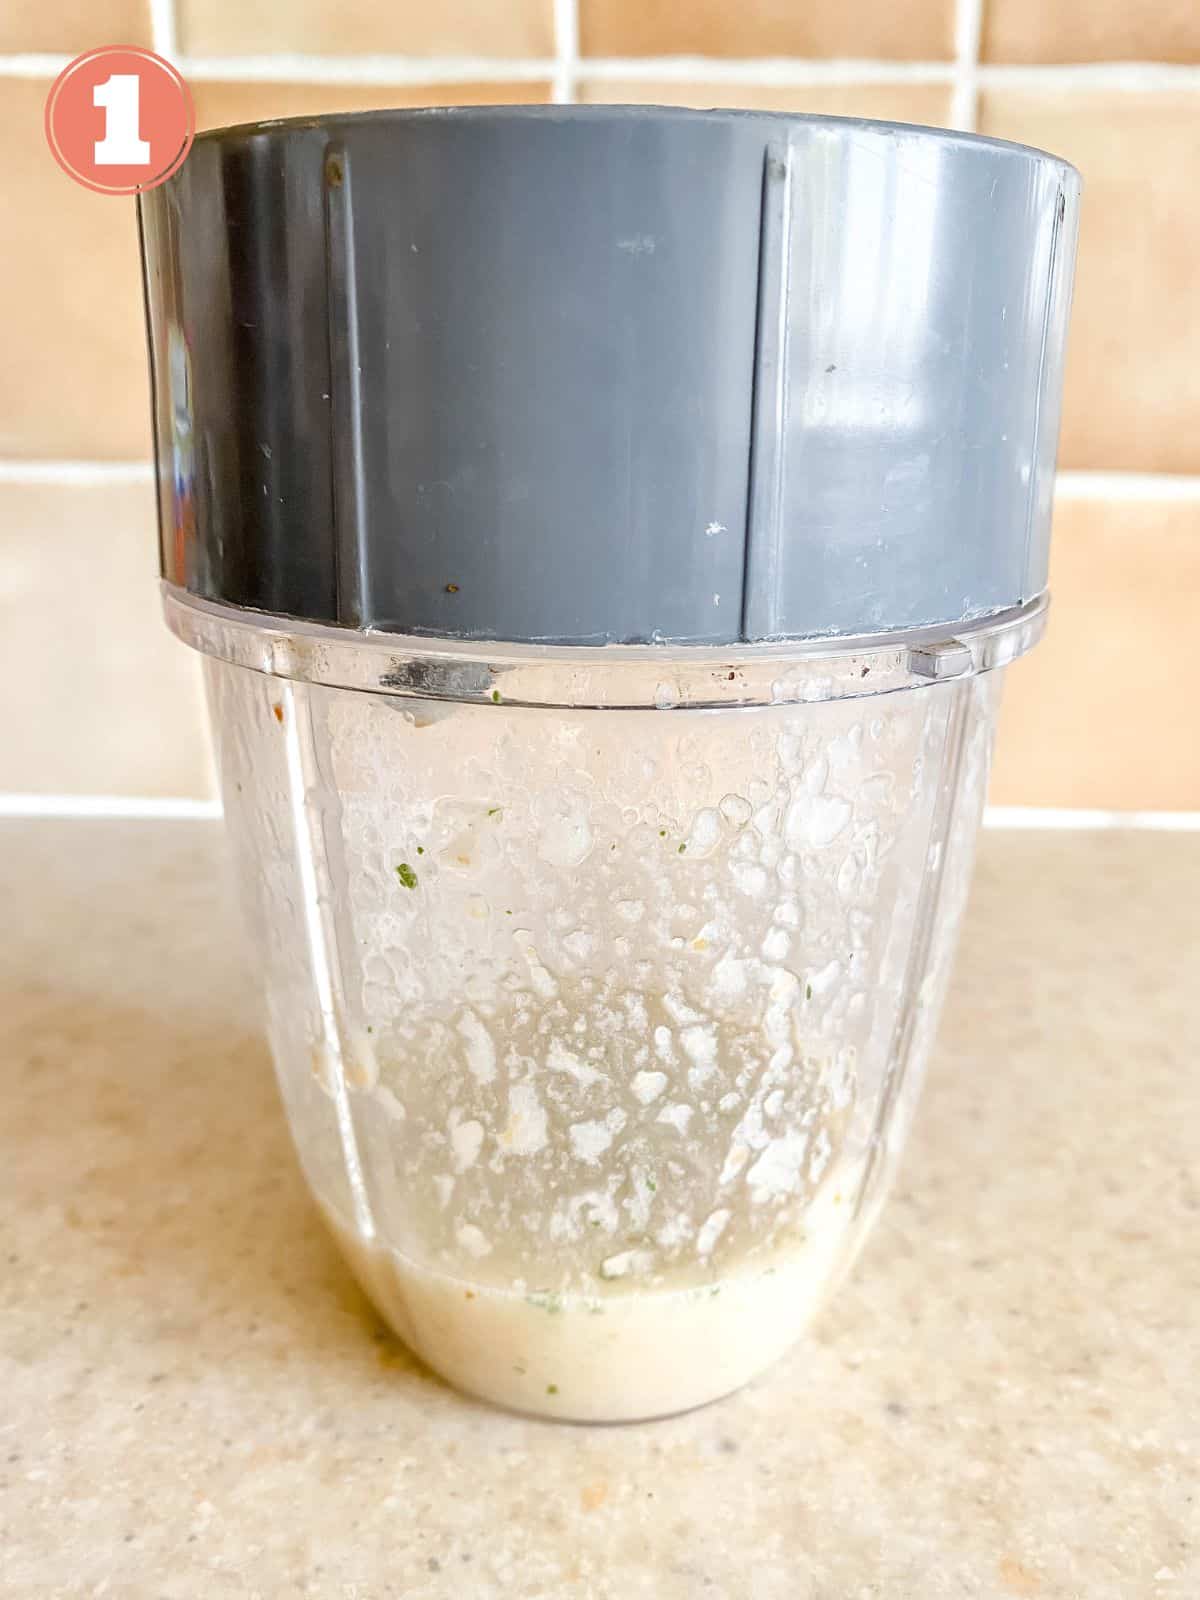 lychee puree in a blender cup.